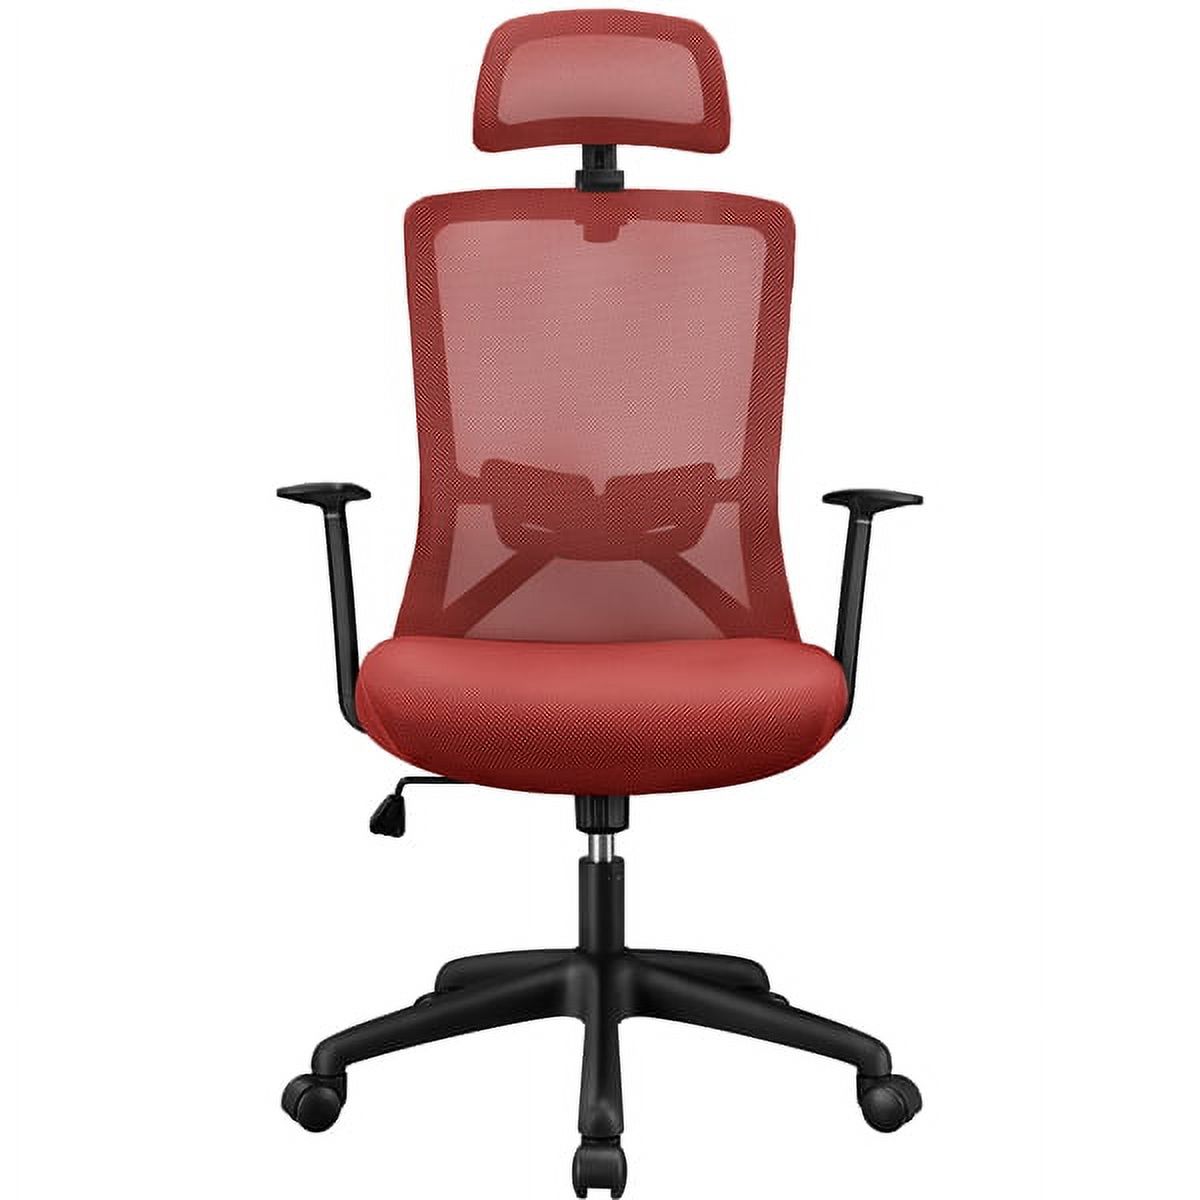 SMILE MART Ergonomic Mesh Swivel Rolling Executive Office Chair with High Headrest, Red - image 1 of 14